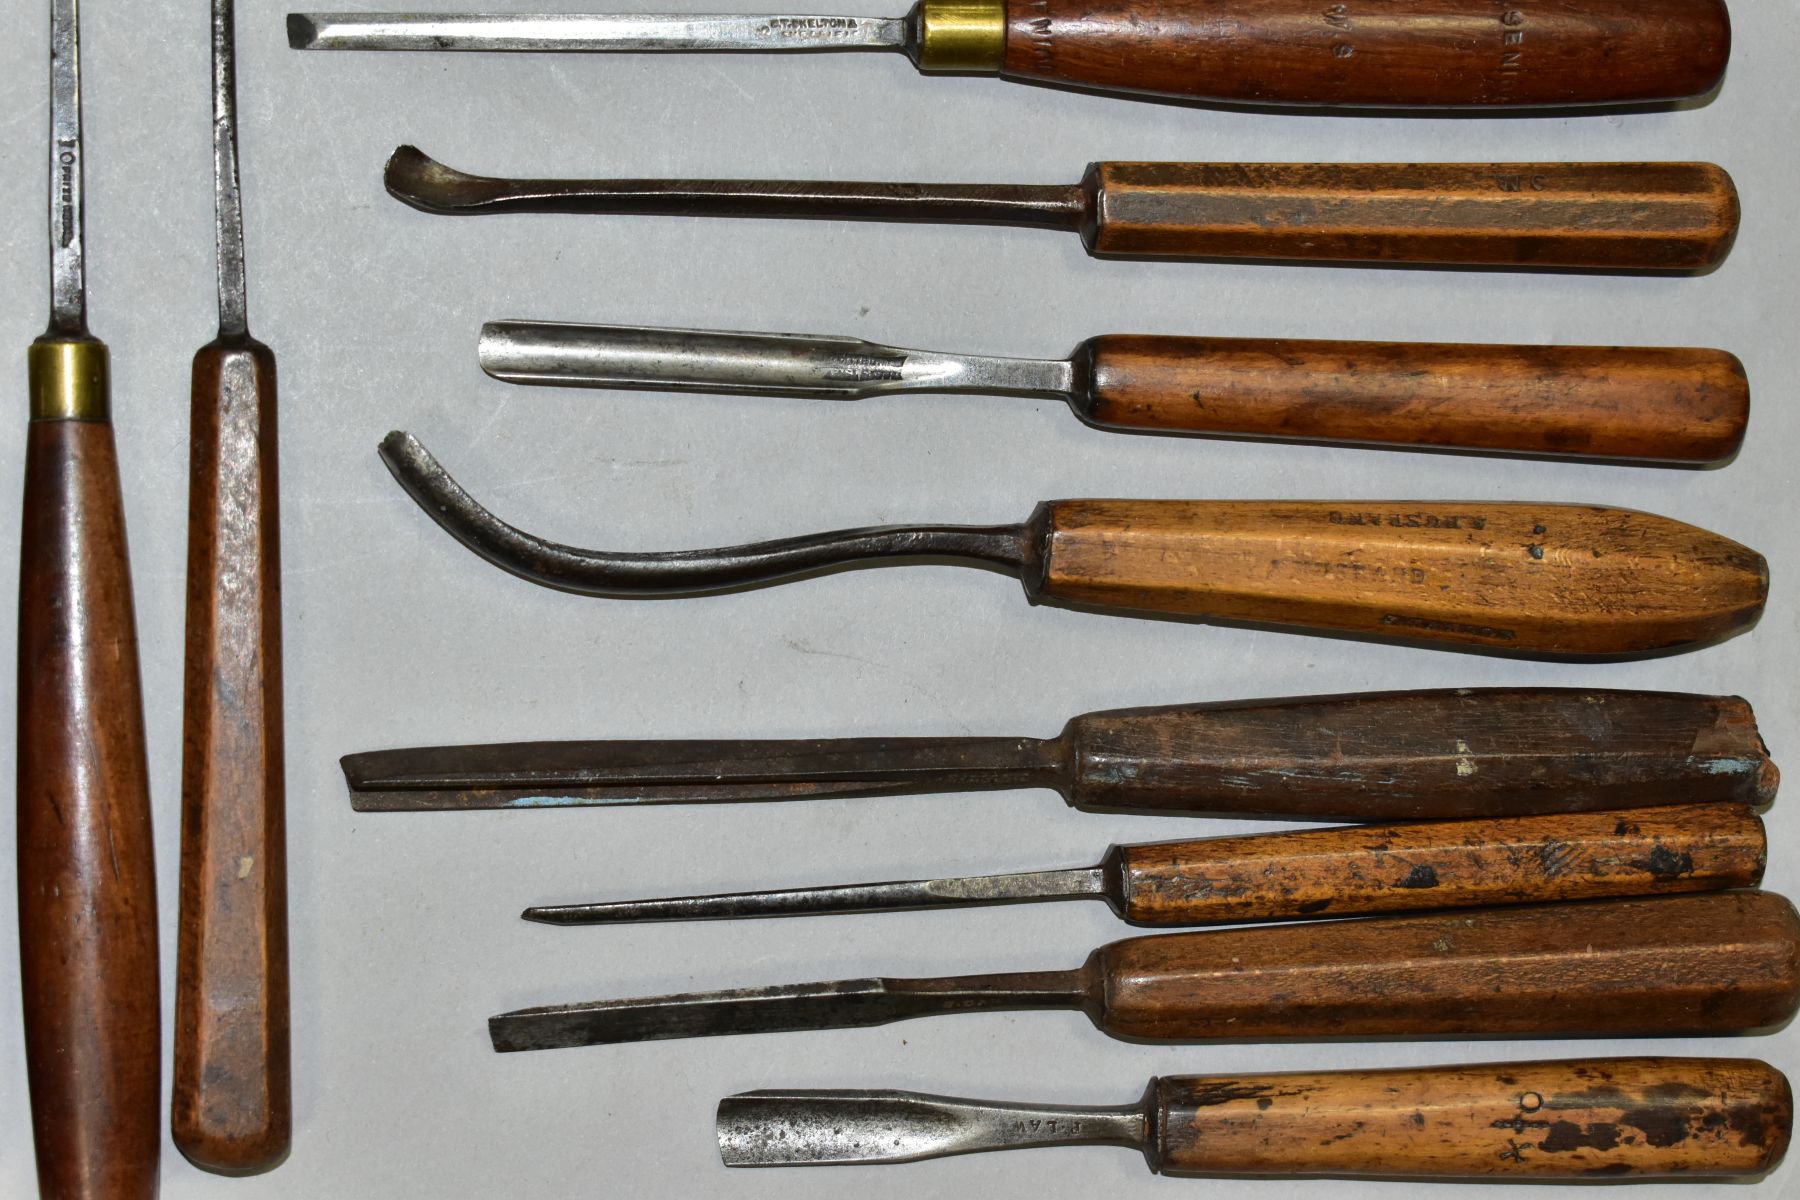 A TRAY CONTAINING TWENTY THREE EARLY CHISELS AND GOUGES including small gauge paring chisels and - Image 4 of 8